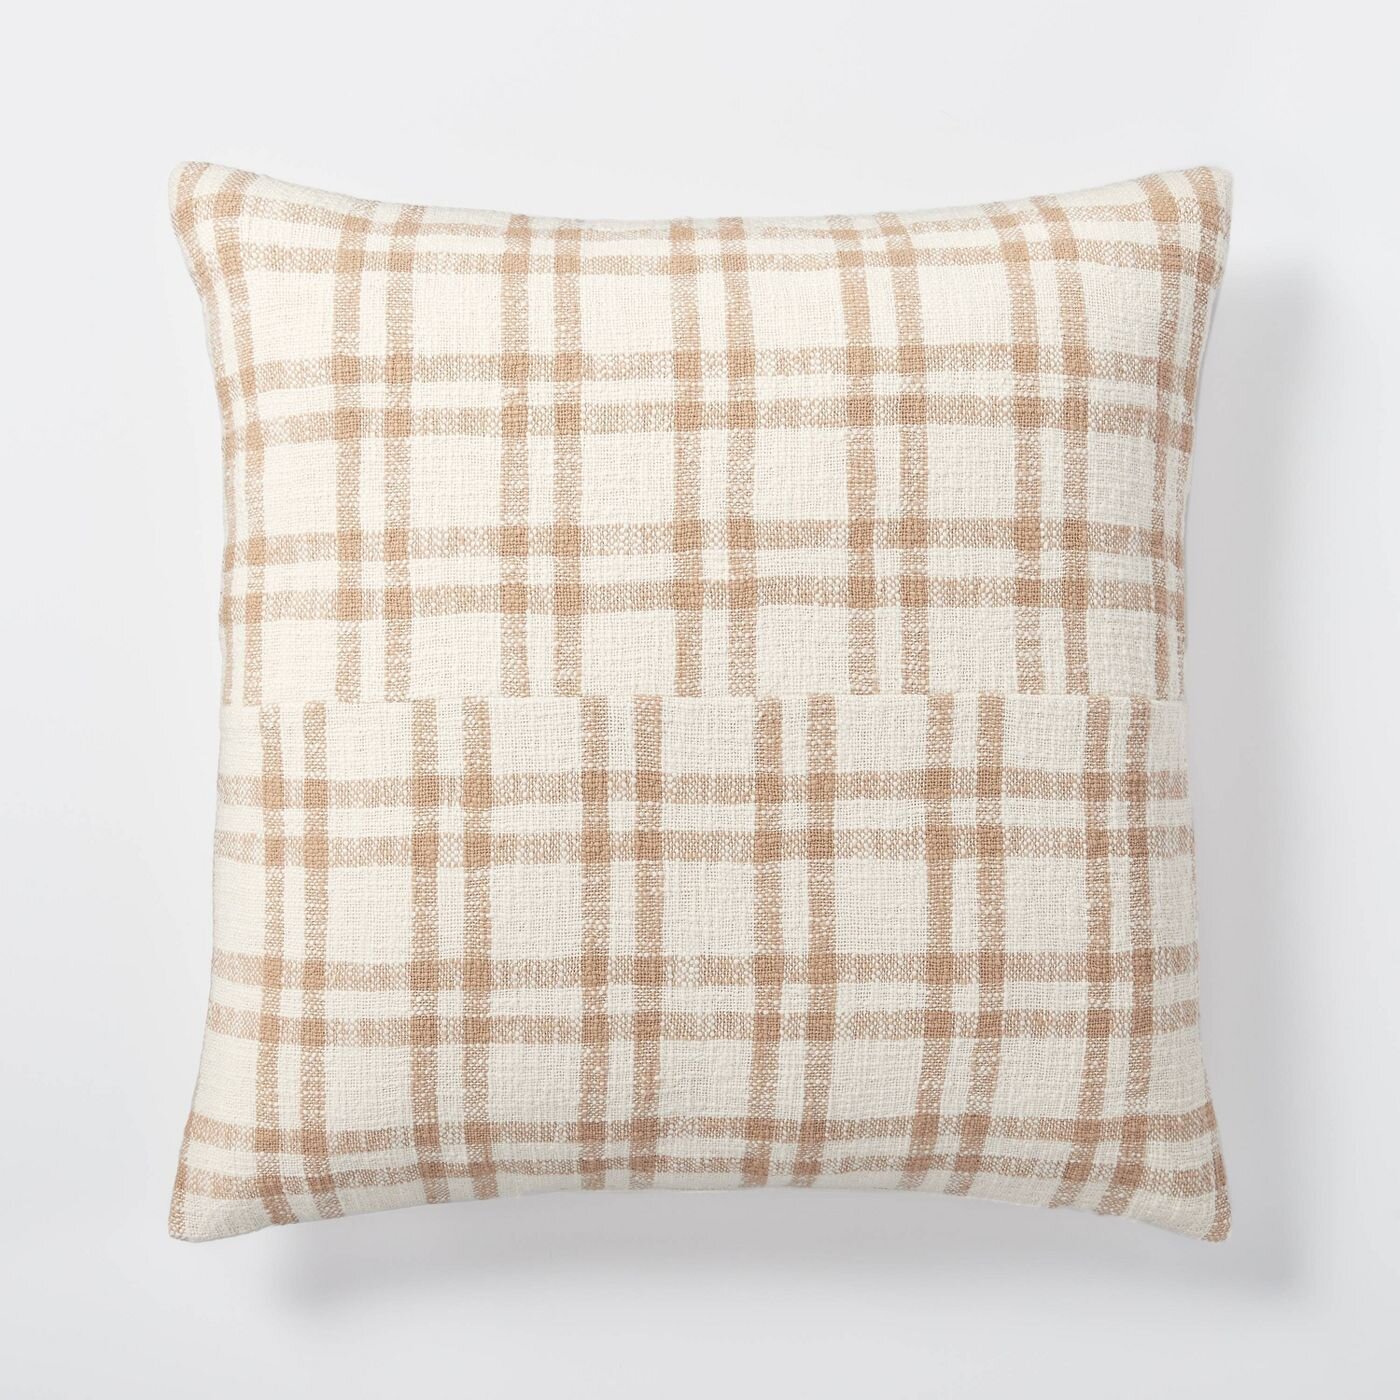 Woven Plaid Throw Pillow with Exposed Zipper Brown/Cream